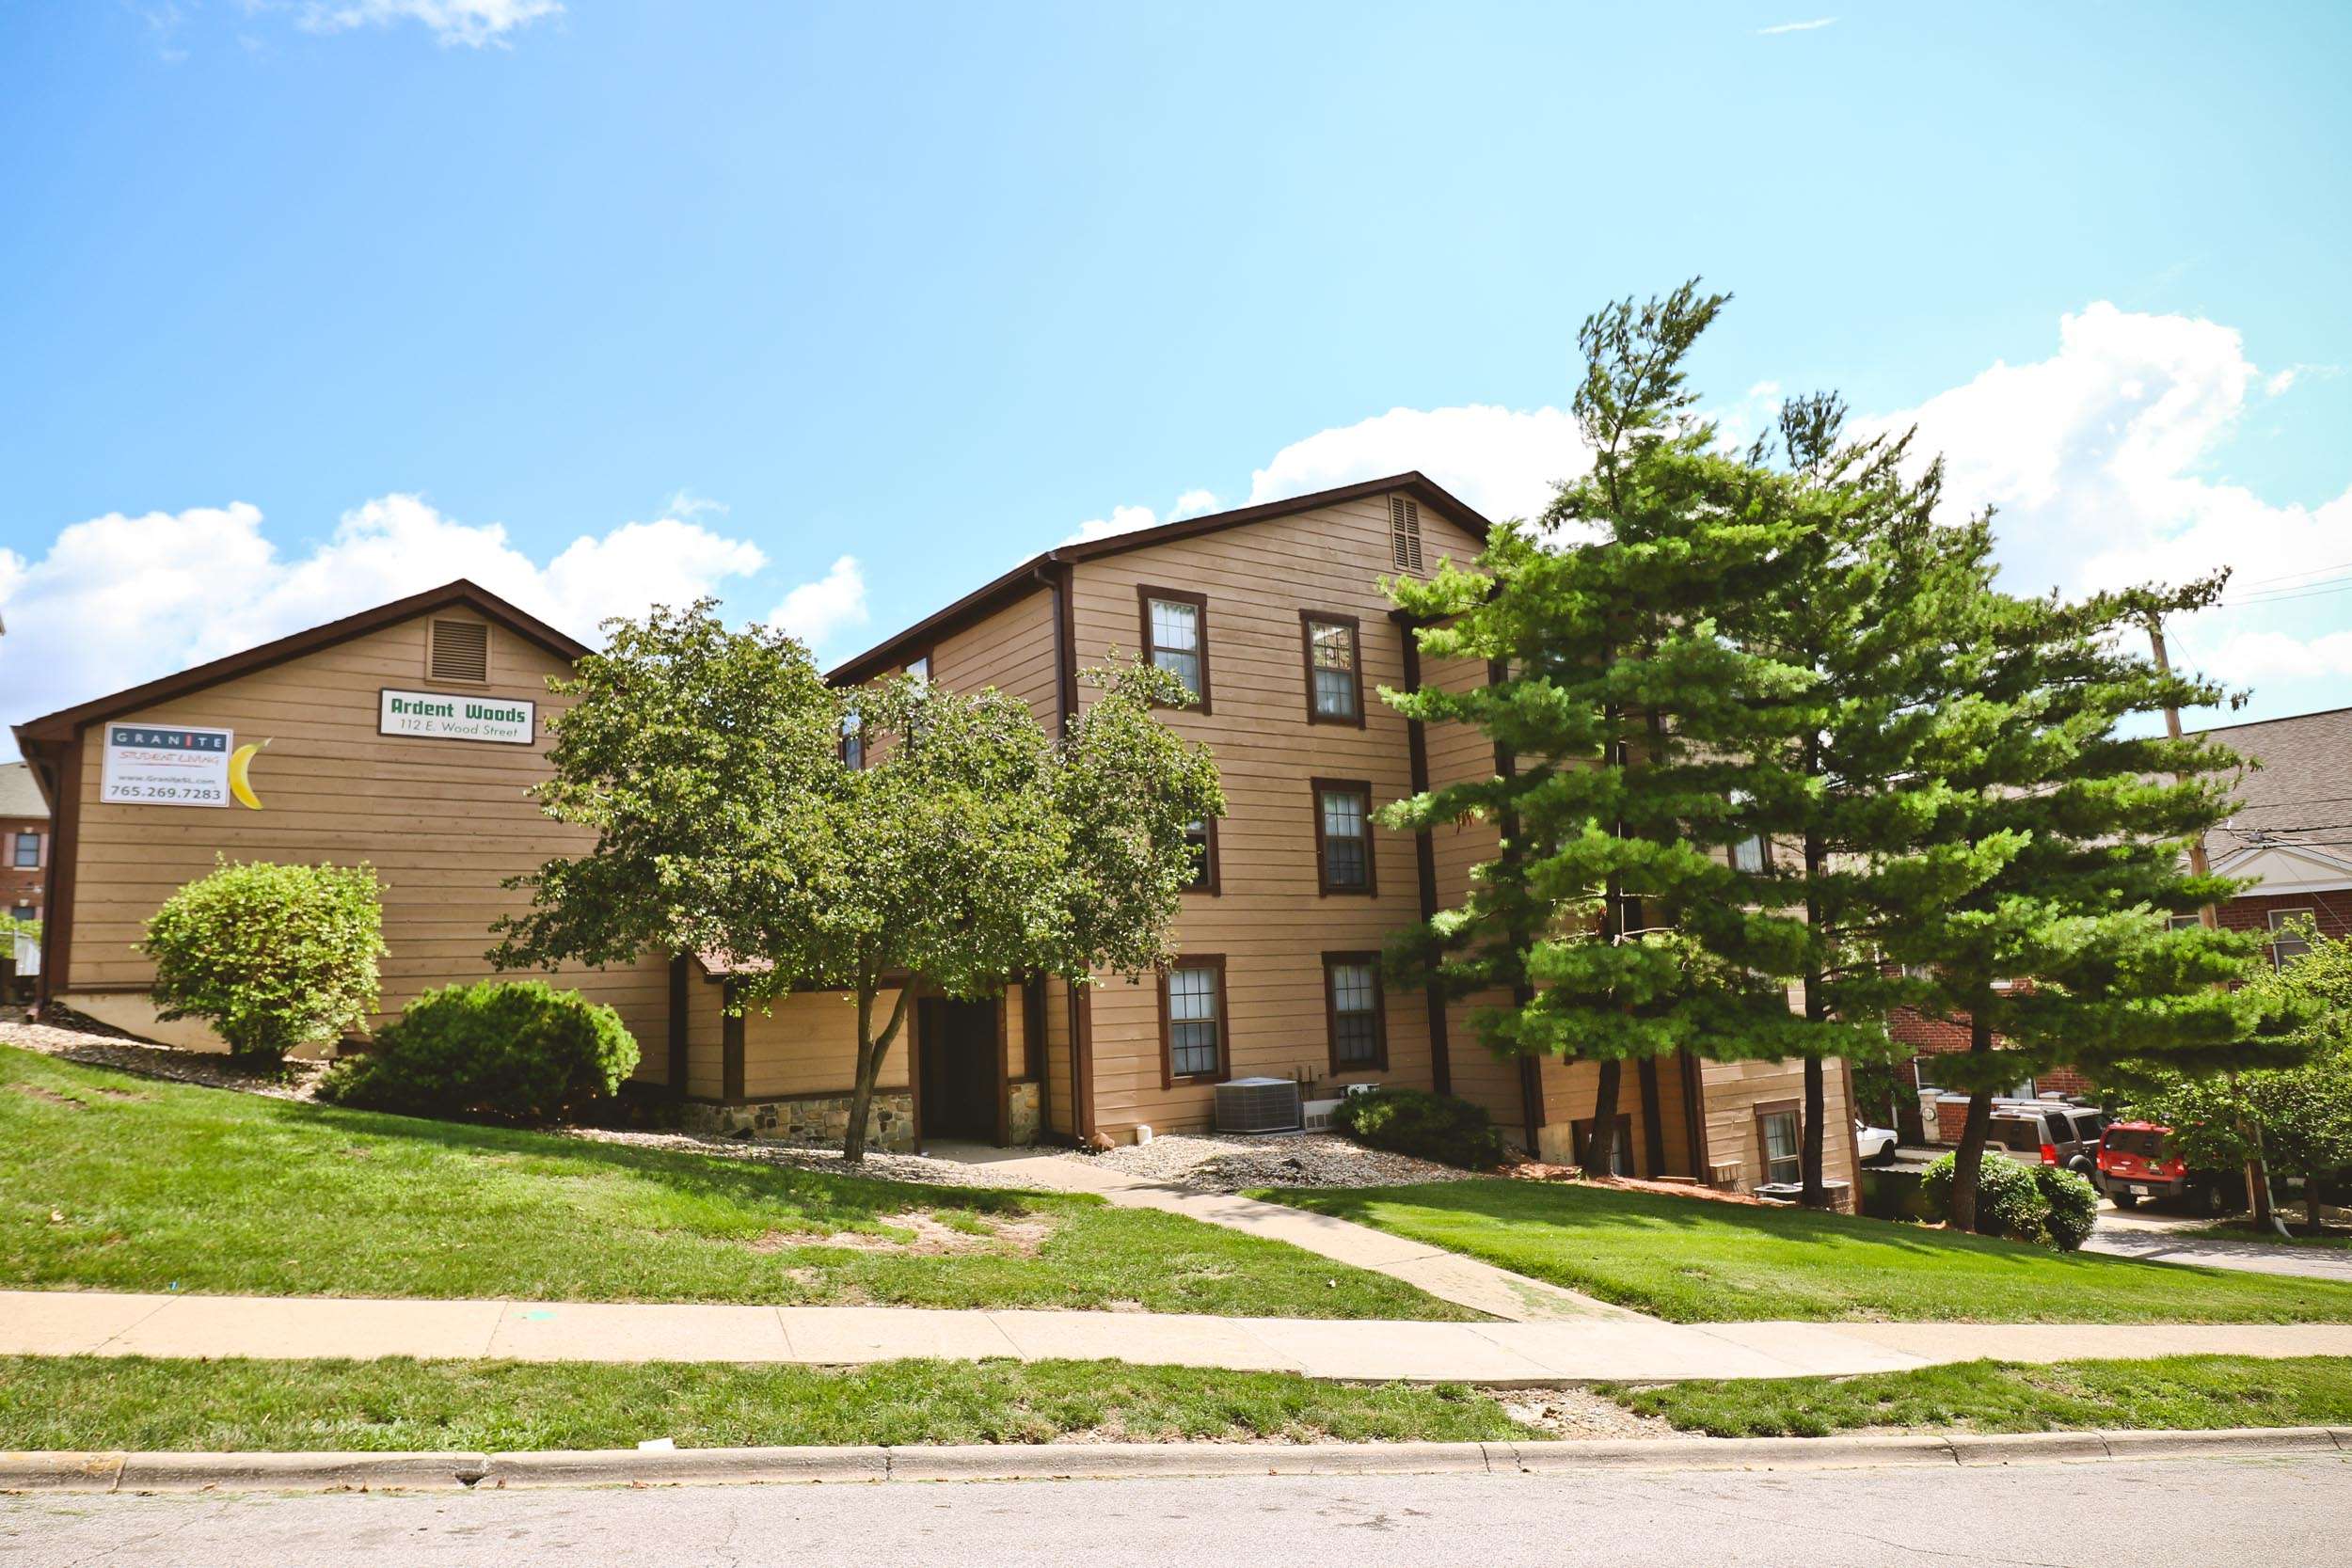 find-apartments/Ardent-Woods/112-E.-Wood-Street-West-Lafayette/1453